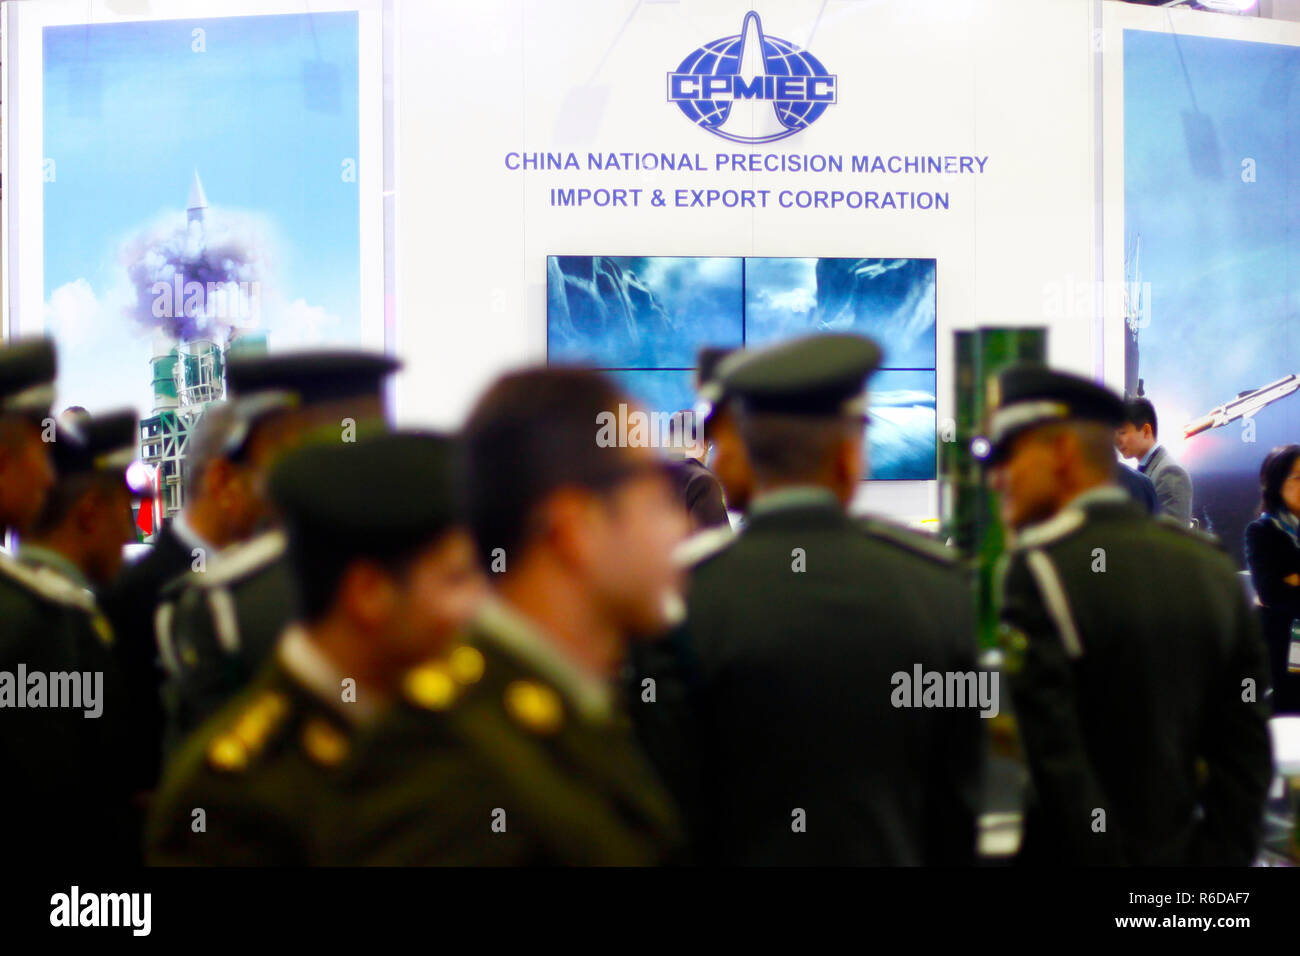 Cairo. 4th Dec, 2018. Photo taken on Dec. 4, 2018 shows the pavilion of China National Precision Machinery Import & Export Corporation at Egypt Defence Expo (EDEX) 2018 in Cairo, Egypt. Chinese defense products have demonstrated strong presence in their pavilions at Egypt's first tri-service defense expo, EDEX 2018, held on Dec. 3-5 in the Cairo International Convention and Exhibition Center. Credit: Ahmed Gomaa/Xinhua/Alamy Live News Stock Photo